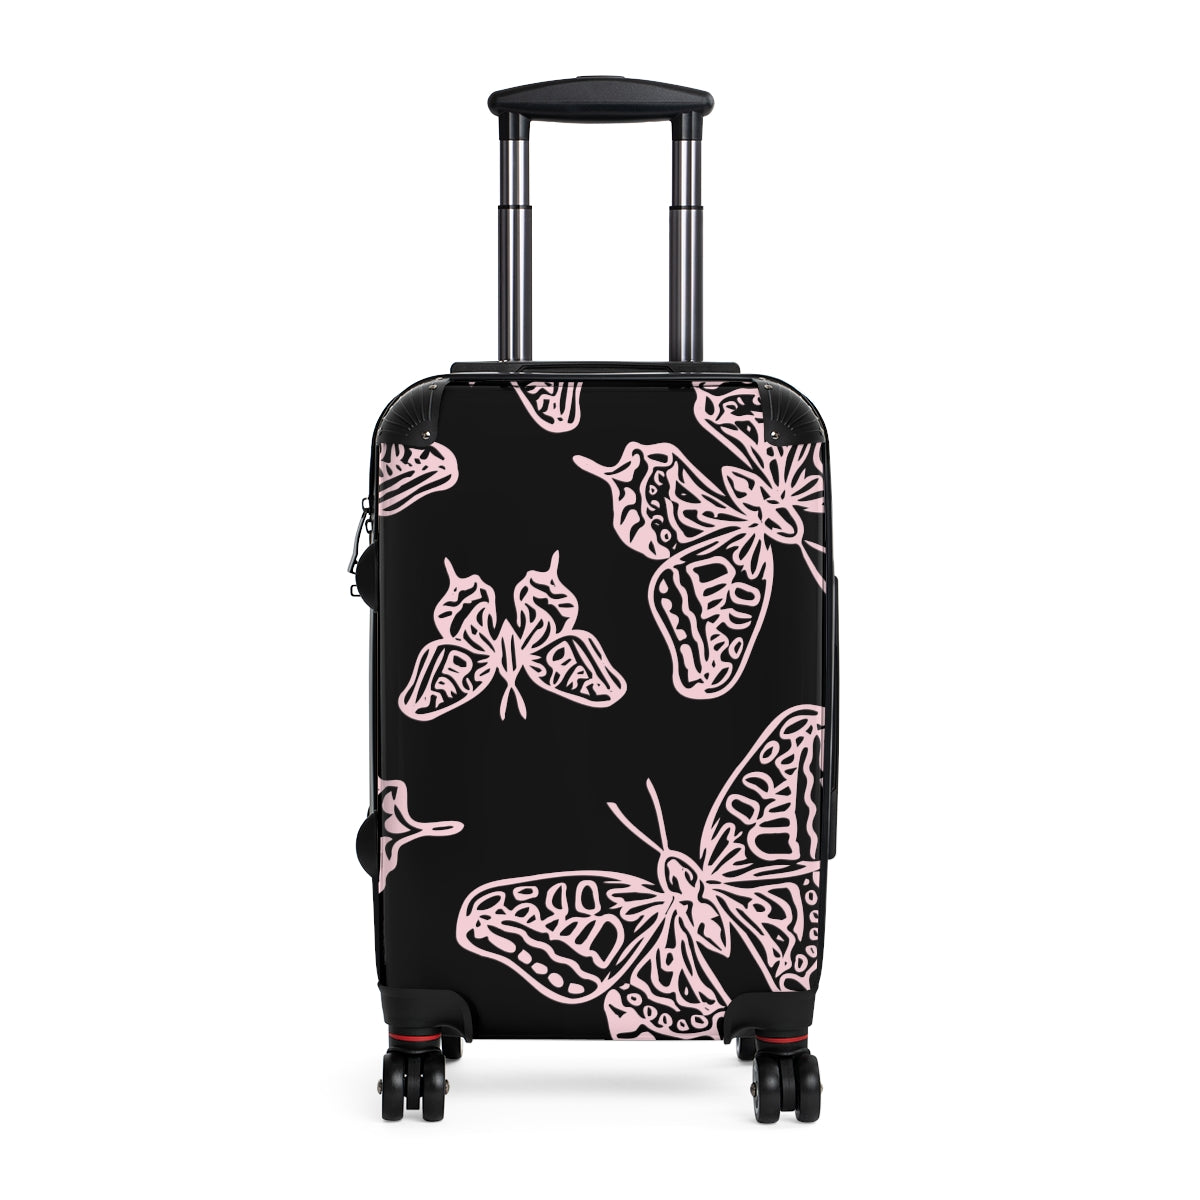 BUTTERFLY SUITCASE SET Artzira, Cabin Suitcase Carry-On Luggage, Trolly Travel Bags Double Wheeled Spinners, Women's Choice, Bridal Gift